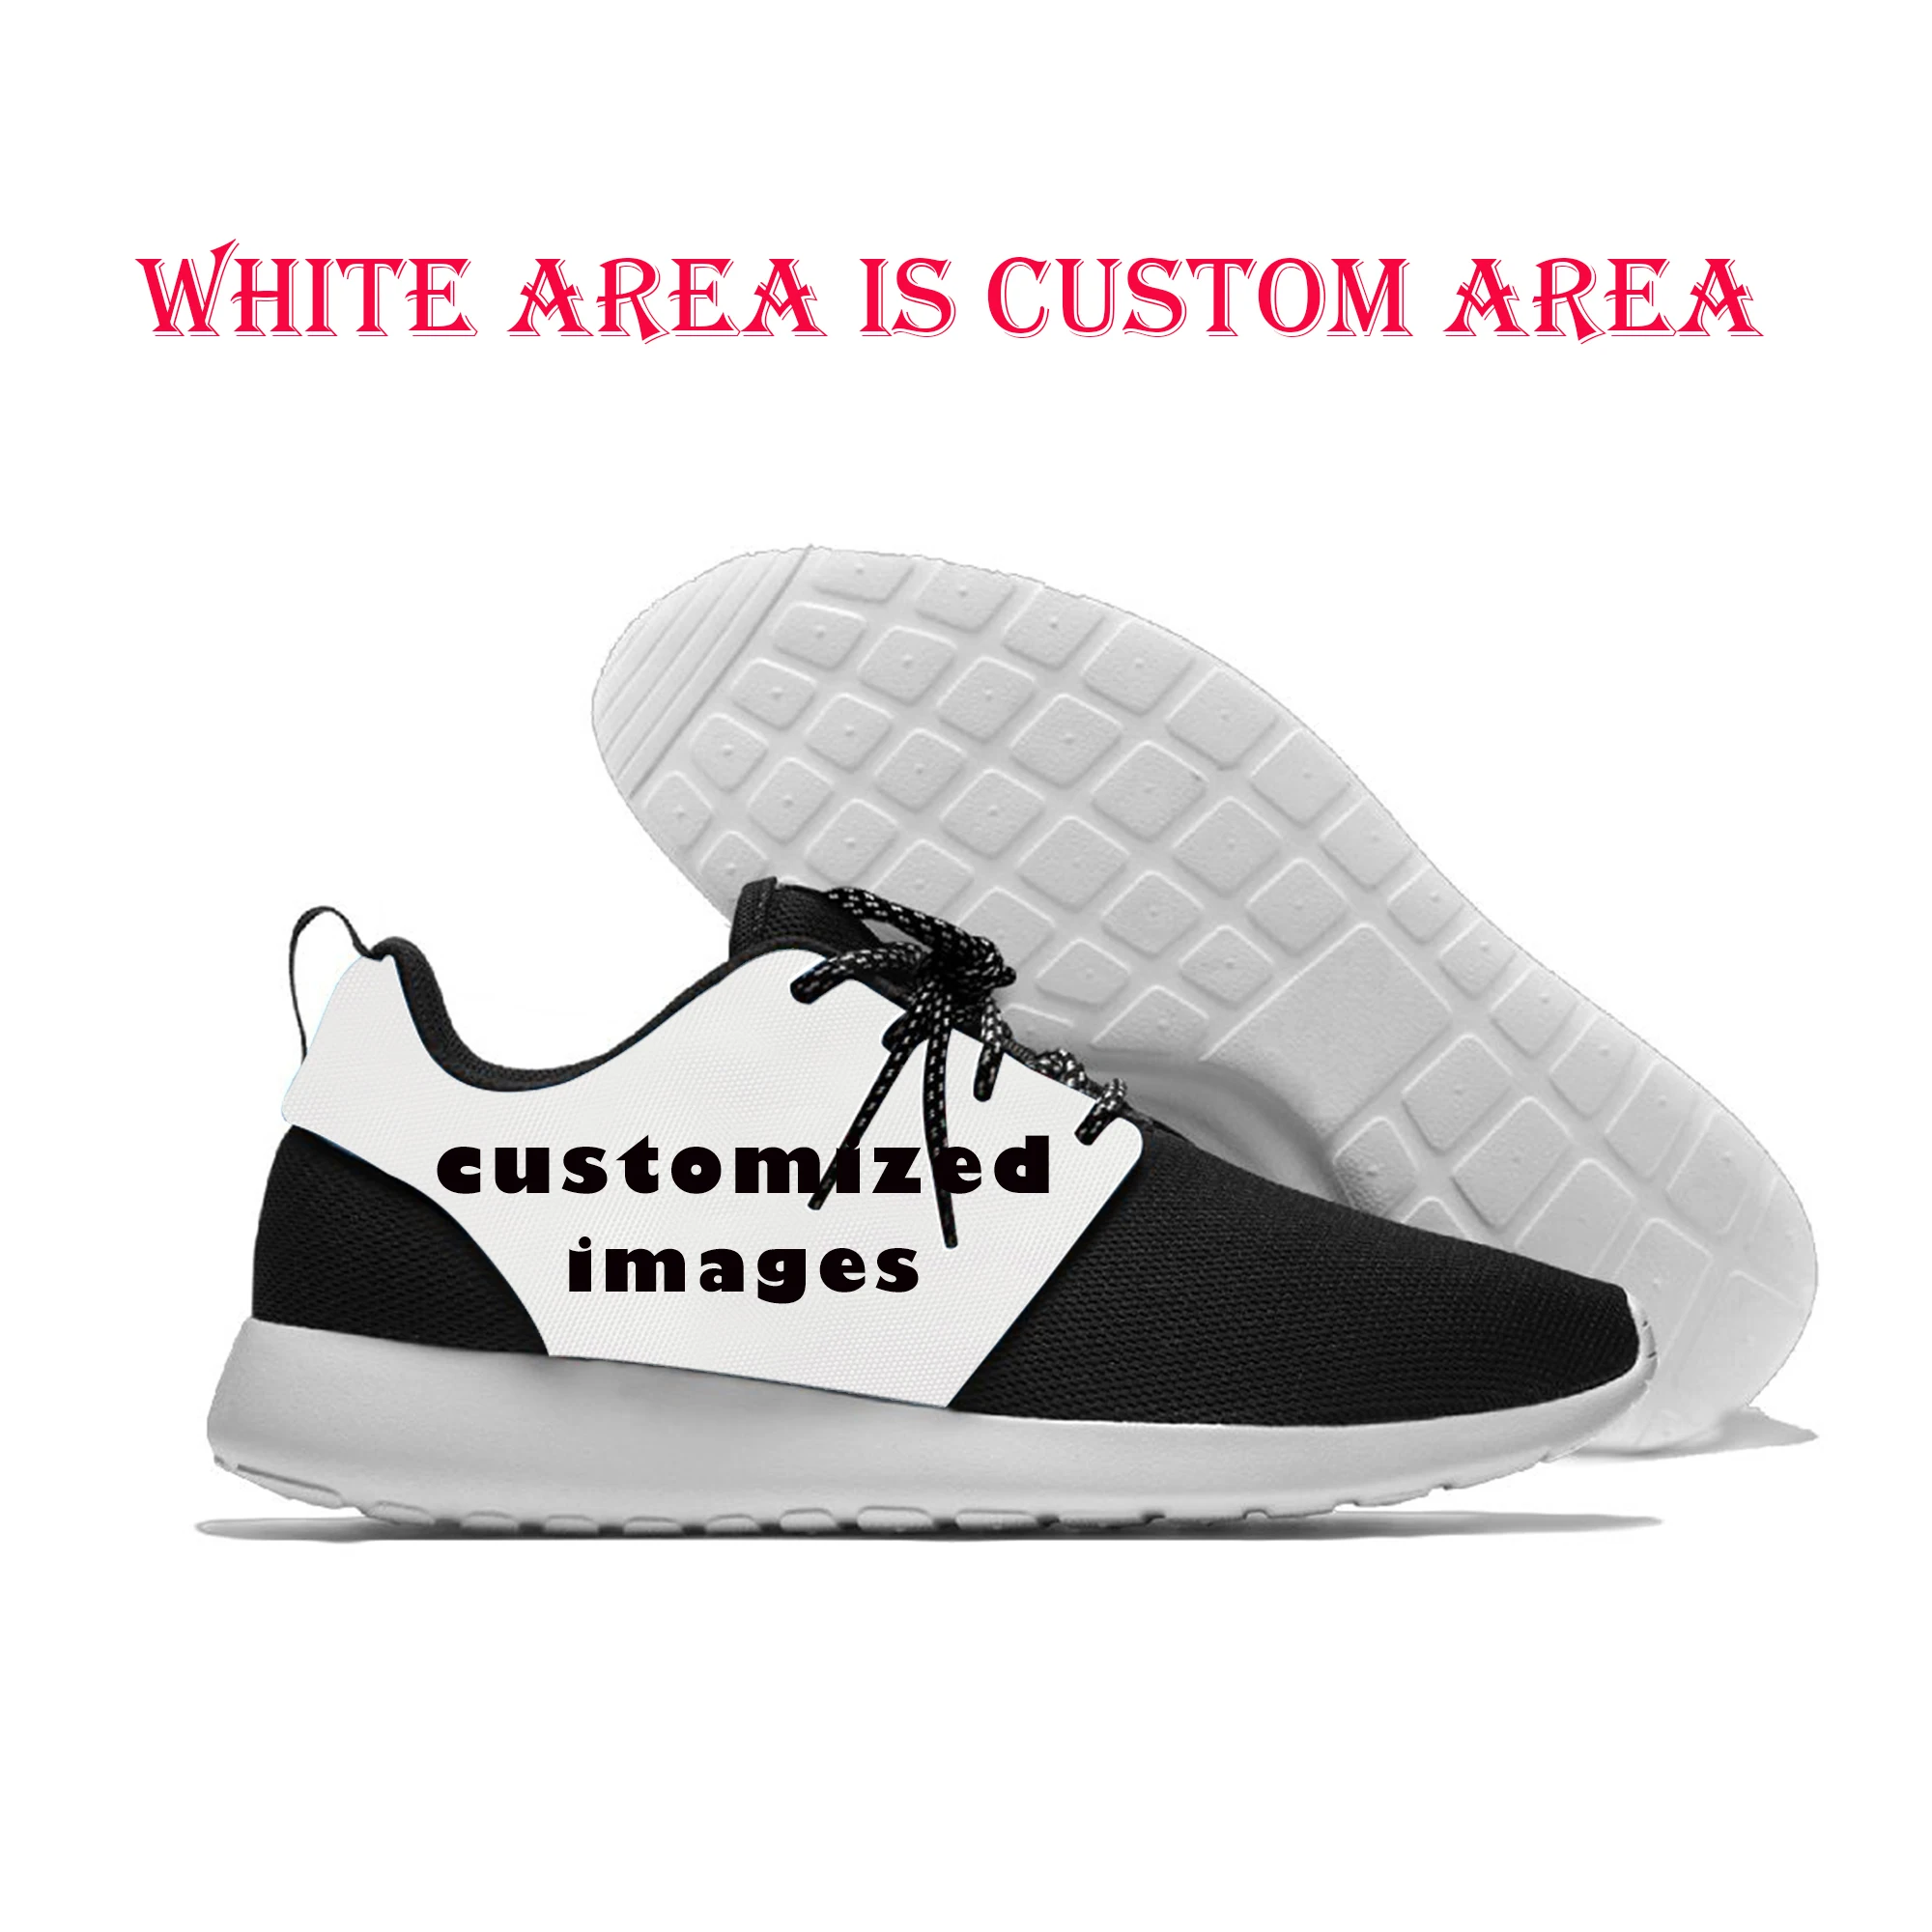 

Running Shoes For Men Sneakers Hot Cool Pop Funny High Quality Handiness For Dita Von Teese Air Mesh Shoes Breathable